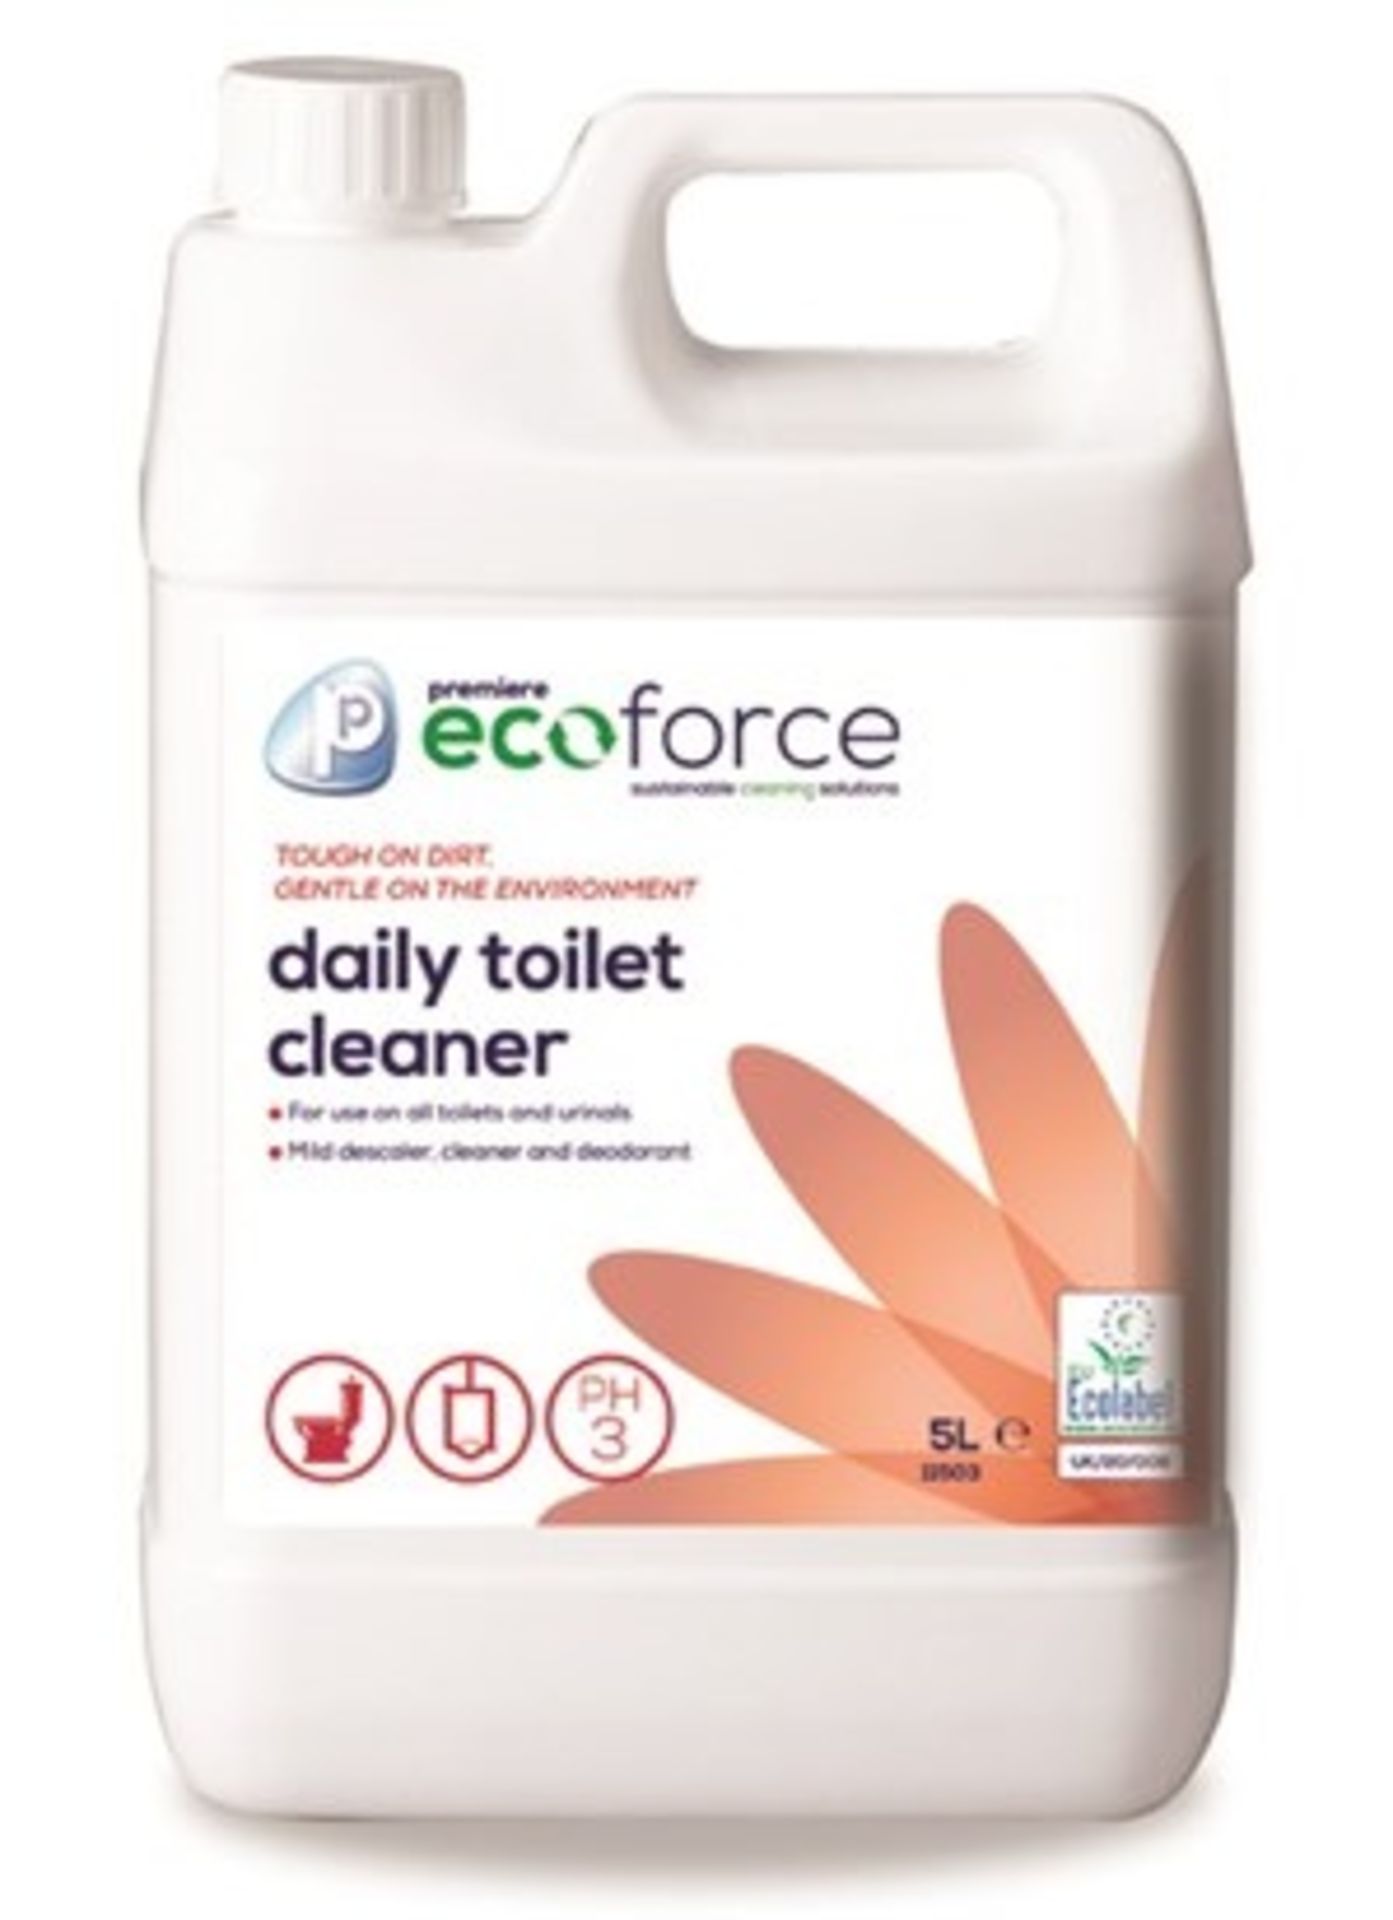 2 x EcoForce 5 Litre Toilet Cleaner - Premiere Products - Daily Toilet Cleaner, Descaler and